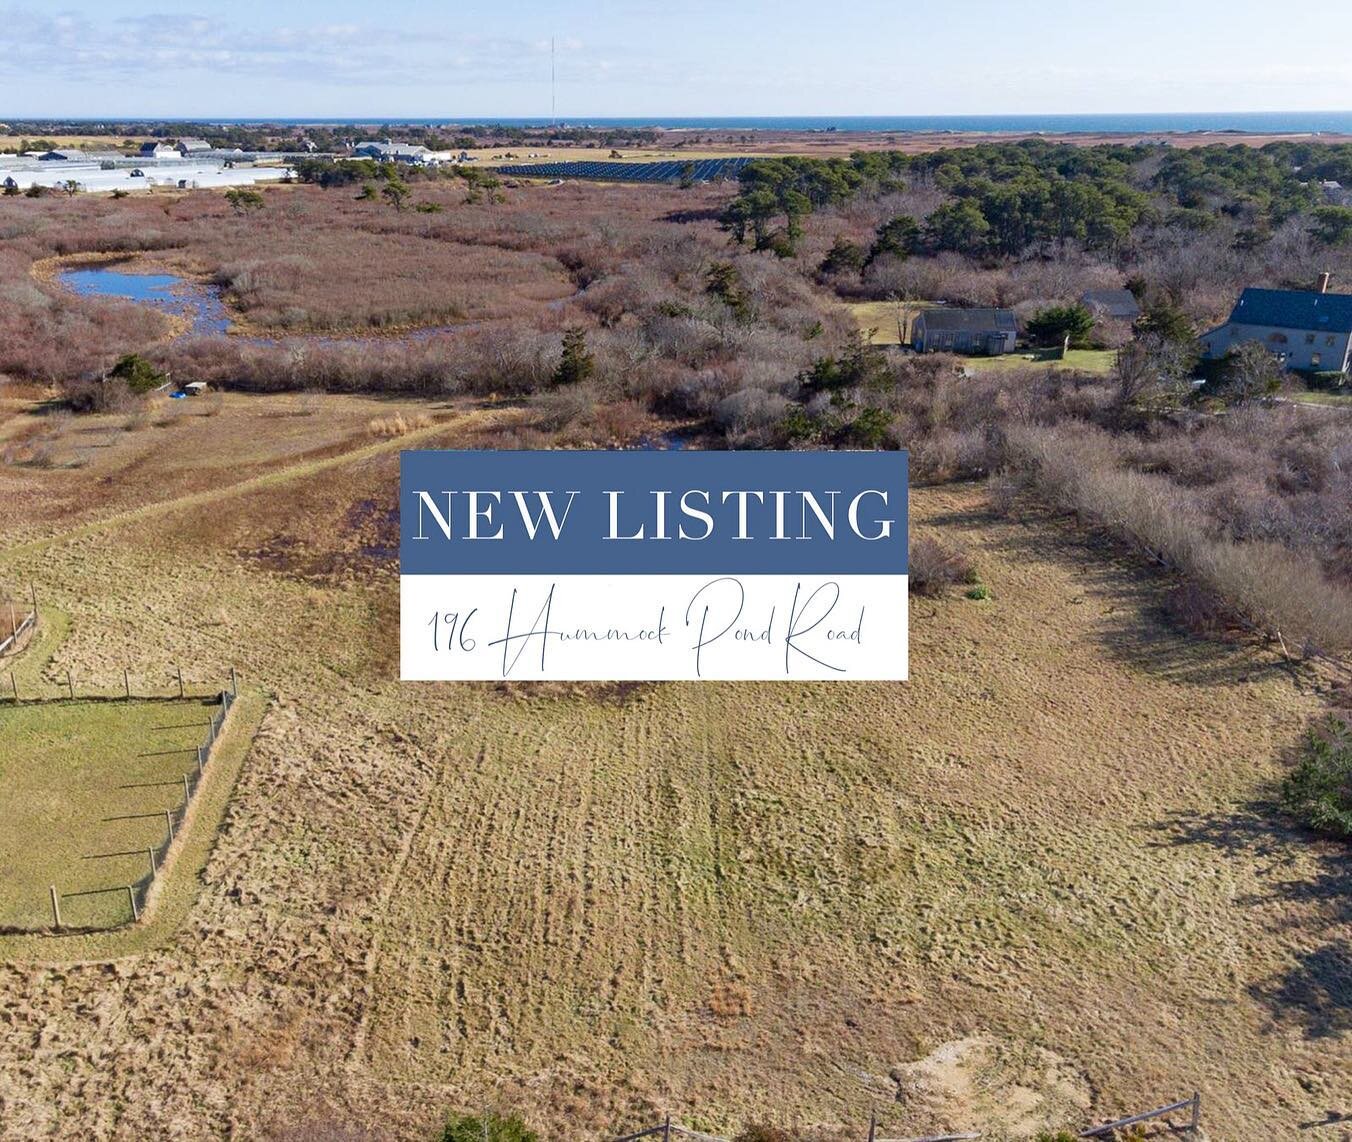 NEW LISTING 🚨 196 Hummock Pond Road &bull; $3,295,000

Now&rsquo;s your chance to build the house you&rsquo;ve been dreaming of on your favorite island 30 miles out to sea! A 5 minute bike ride will take you to the Brewery or Bartletts Farm. Bonus p